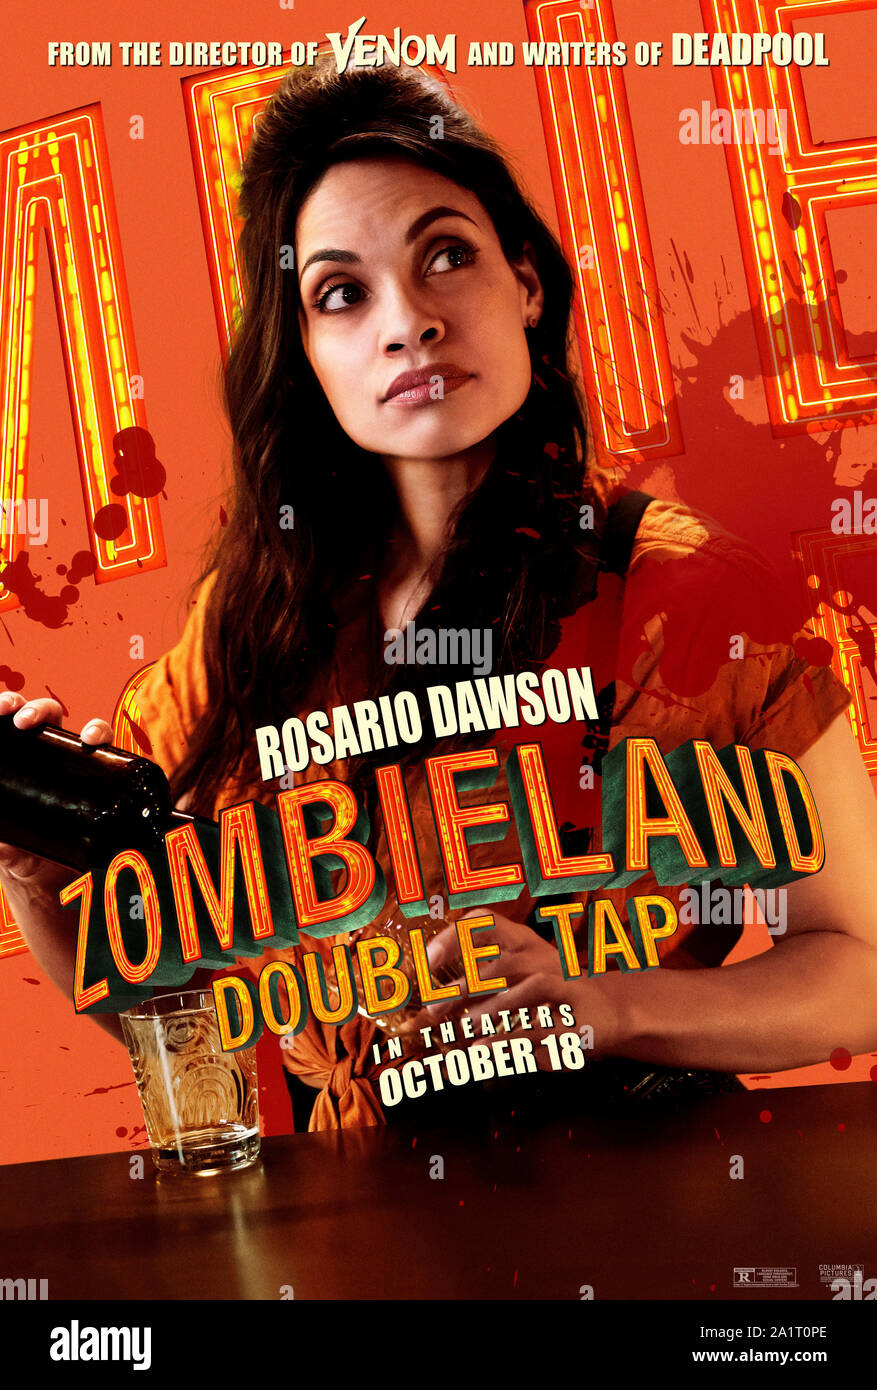 RELEASE DATE: October 18, 2019 TITLE: Zombieland 2: Double Tap STUDIO:  Colombia Pictures DIRECTOR: Ruben Fleischer PLOT: Columbus, Tallahasse,  Wichita, and Little Rock move to the American heartland as they face off